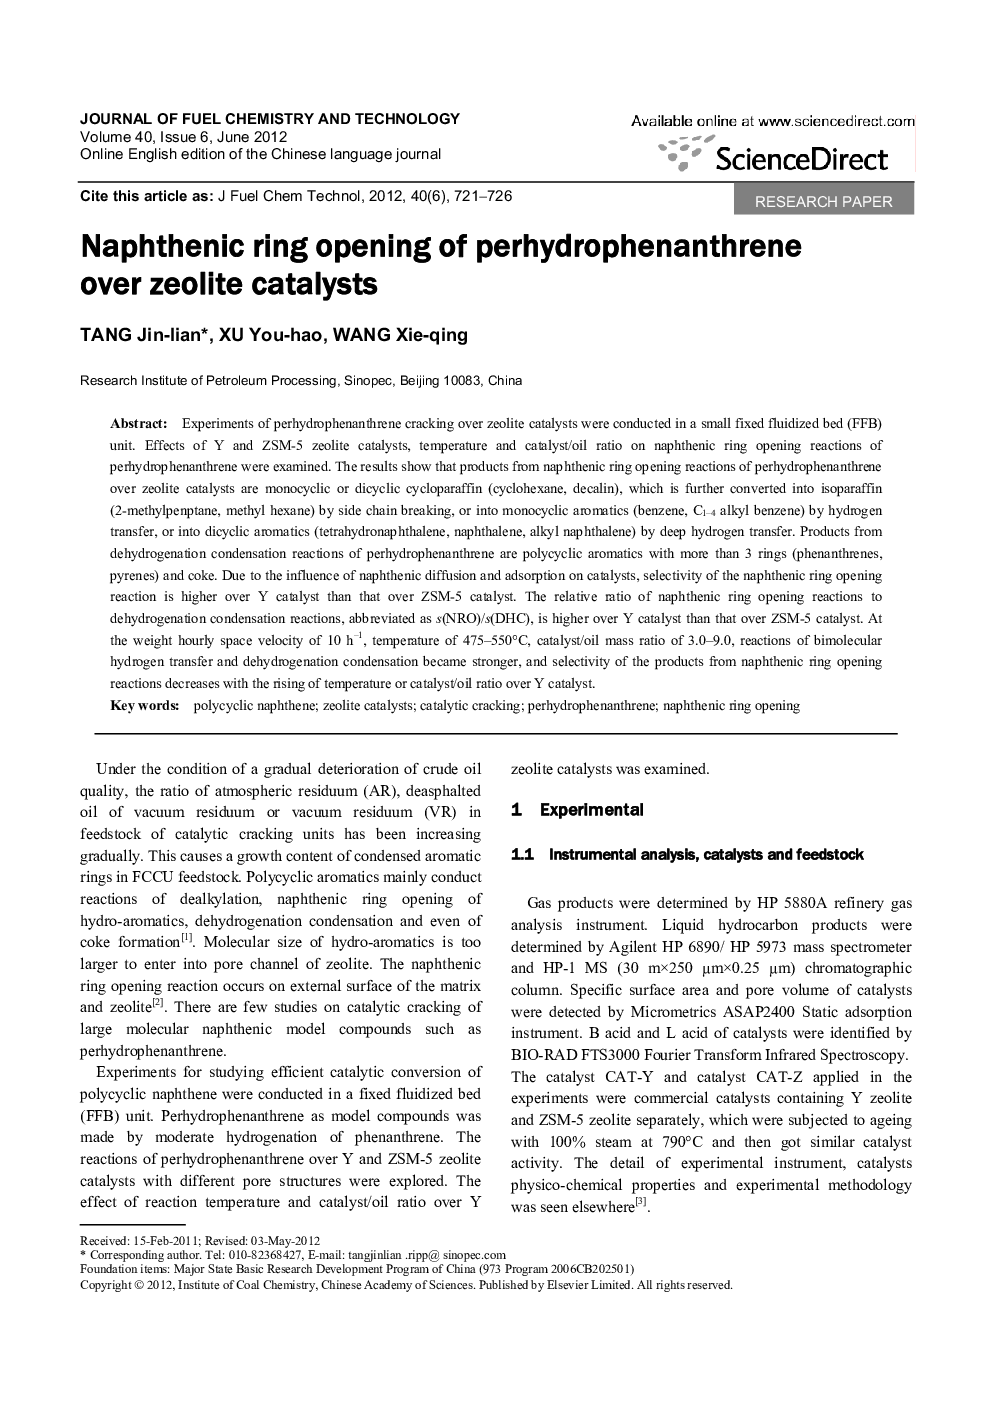 Naphthenic ring opening of perhydrophenanthrene over zeolite catalysts 